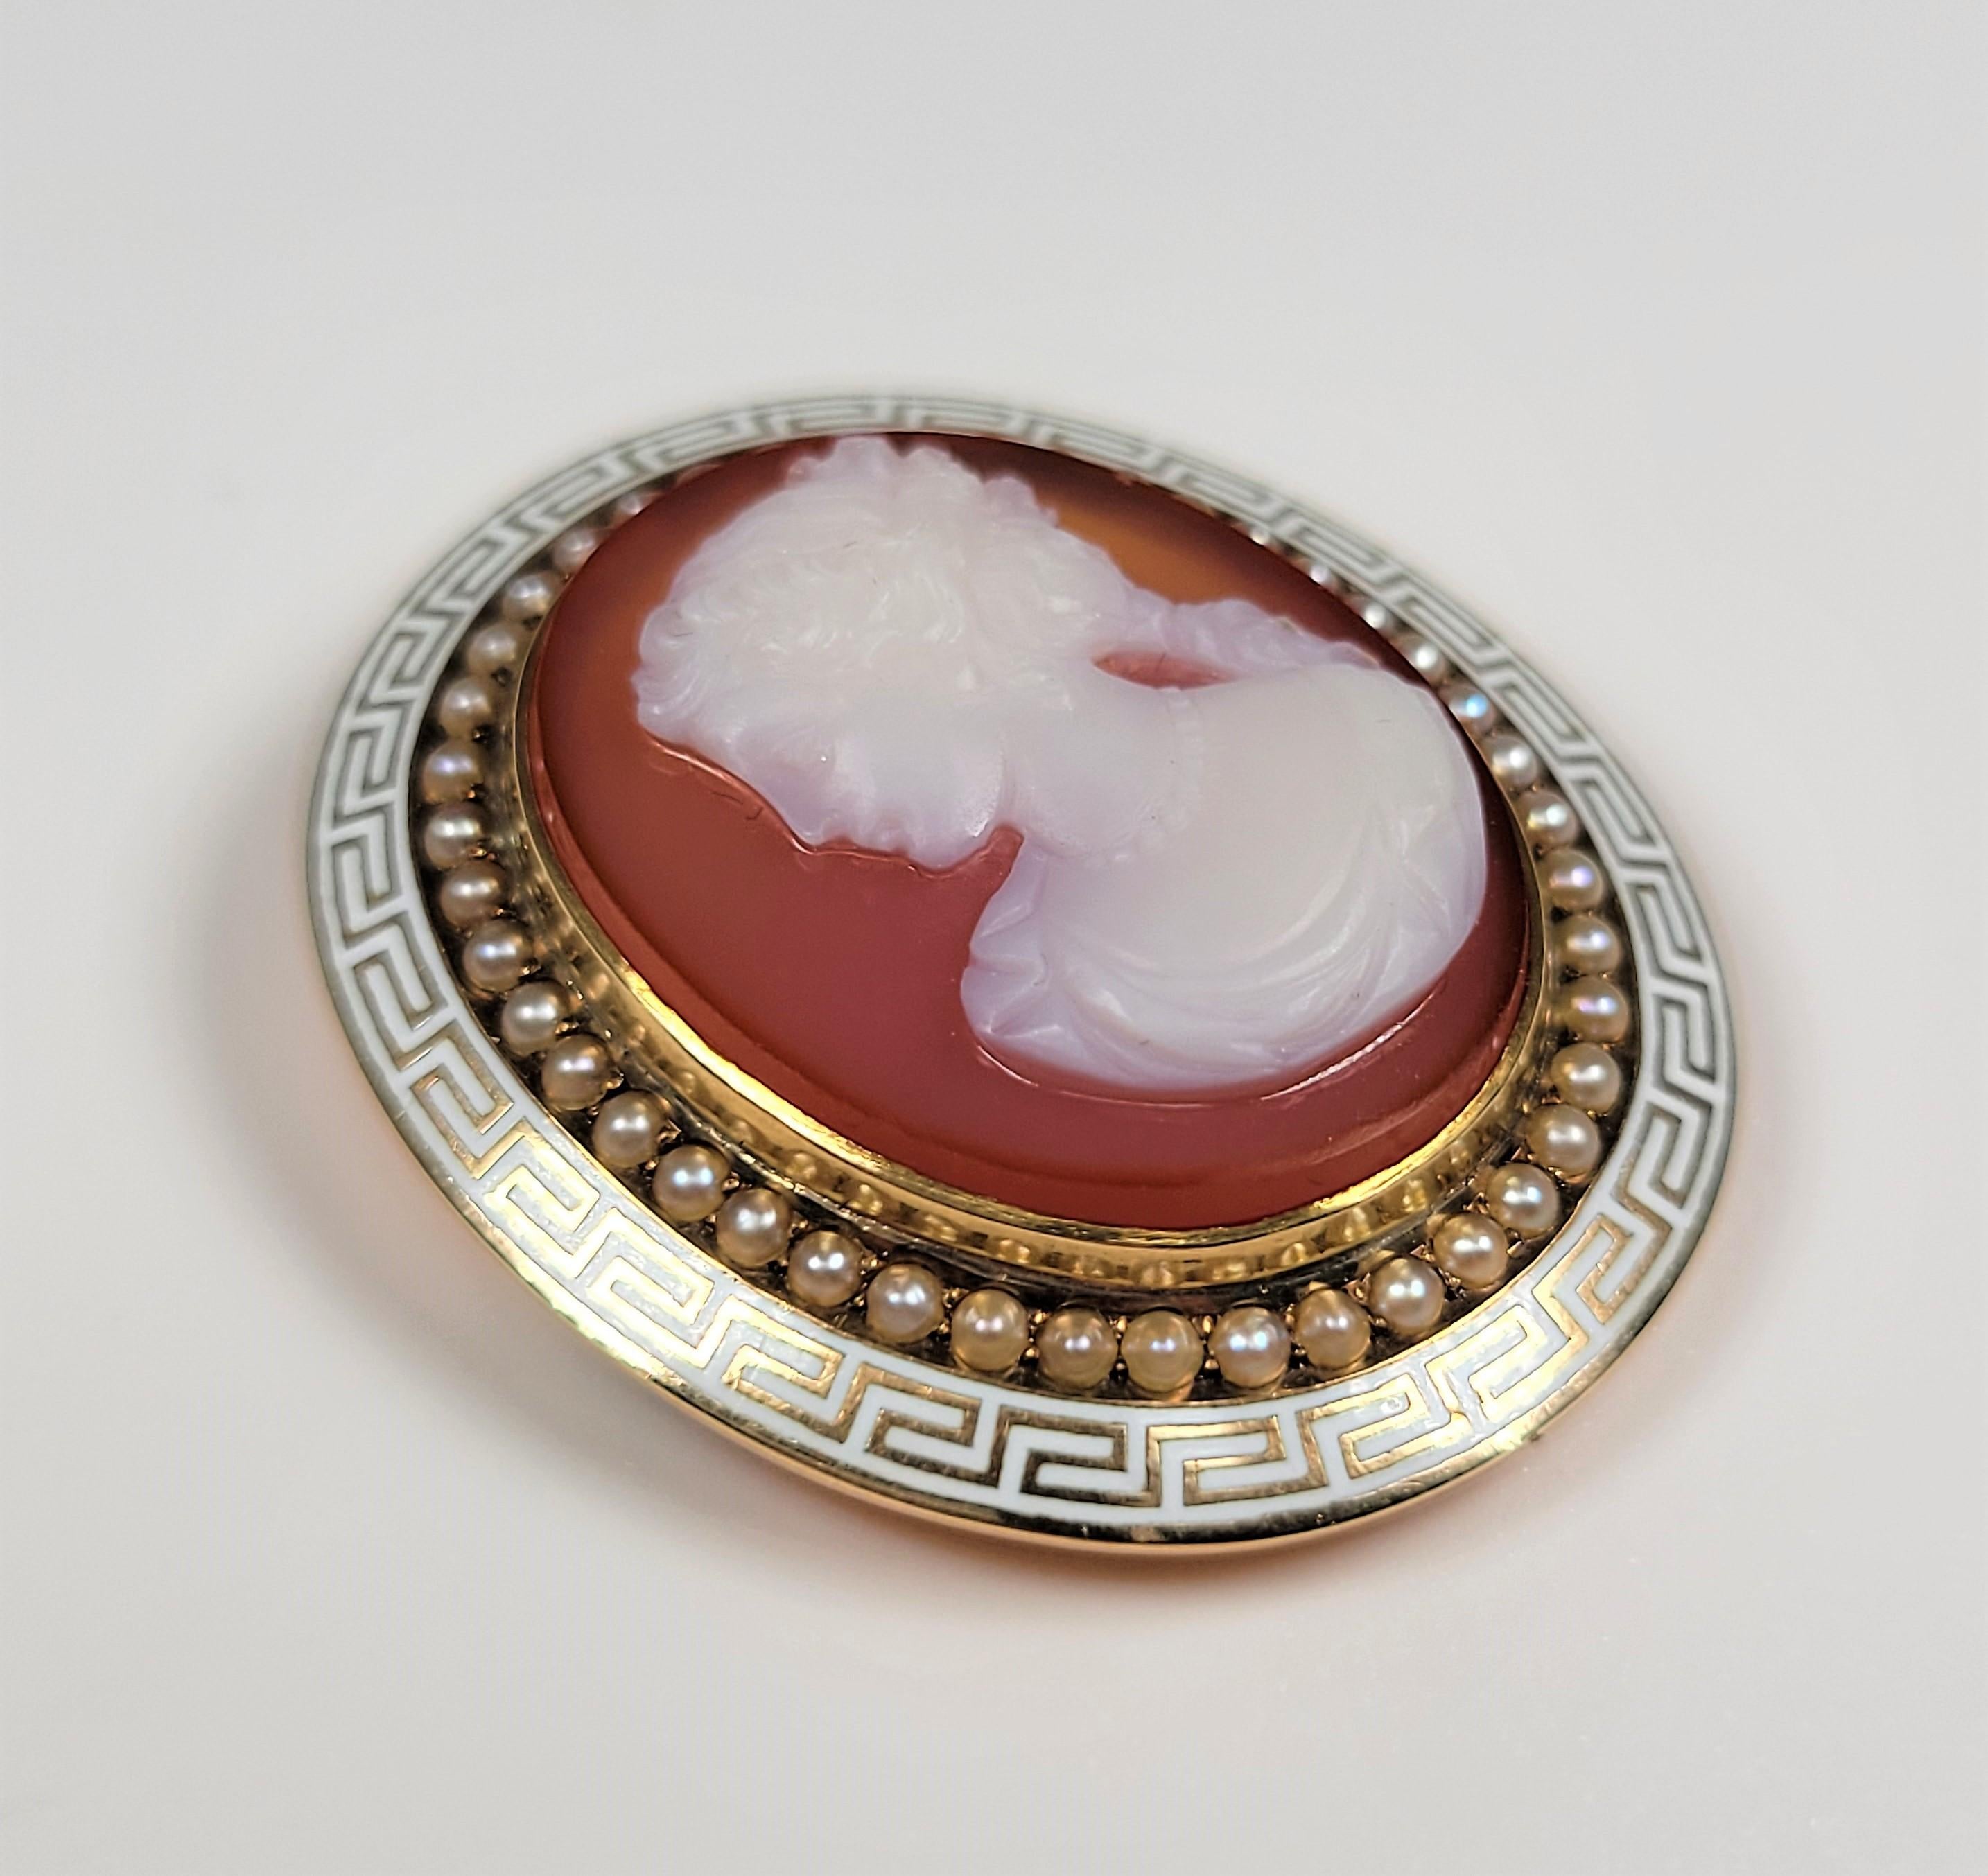 Composed of 14 karat yellow gold, this unusual sardonyx cameo features a row of seed pearls all encircled by white enamel in a Greek key pattern. 